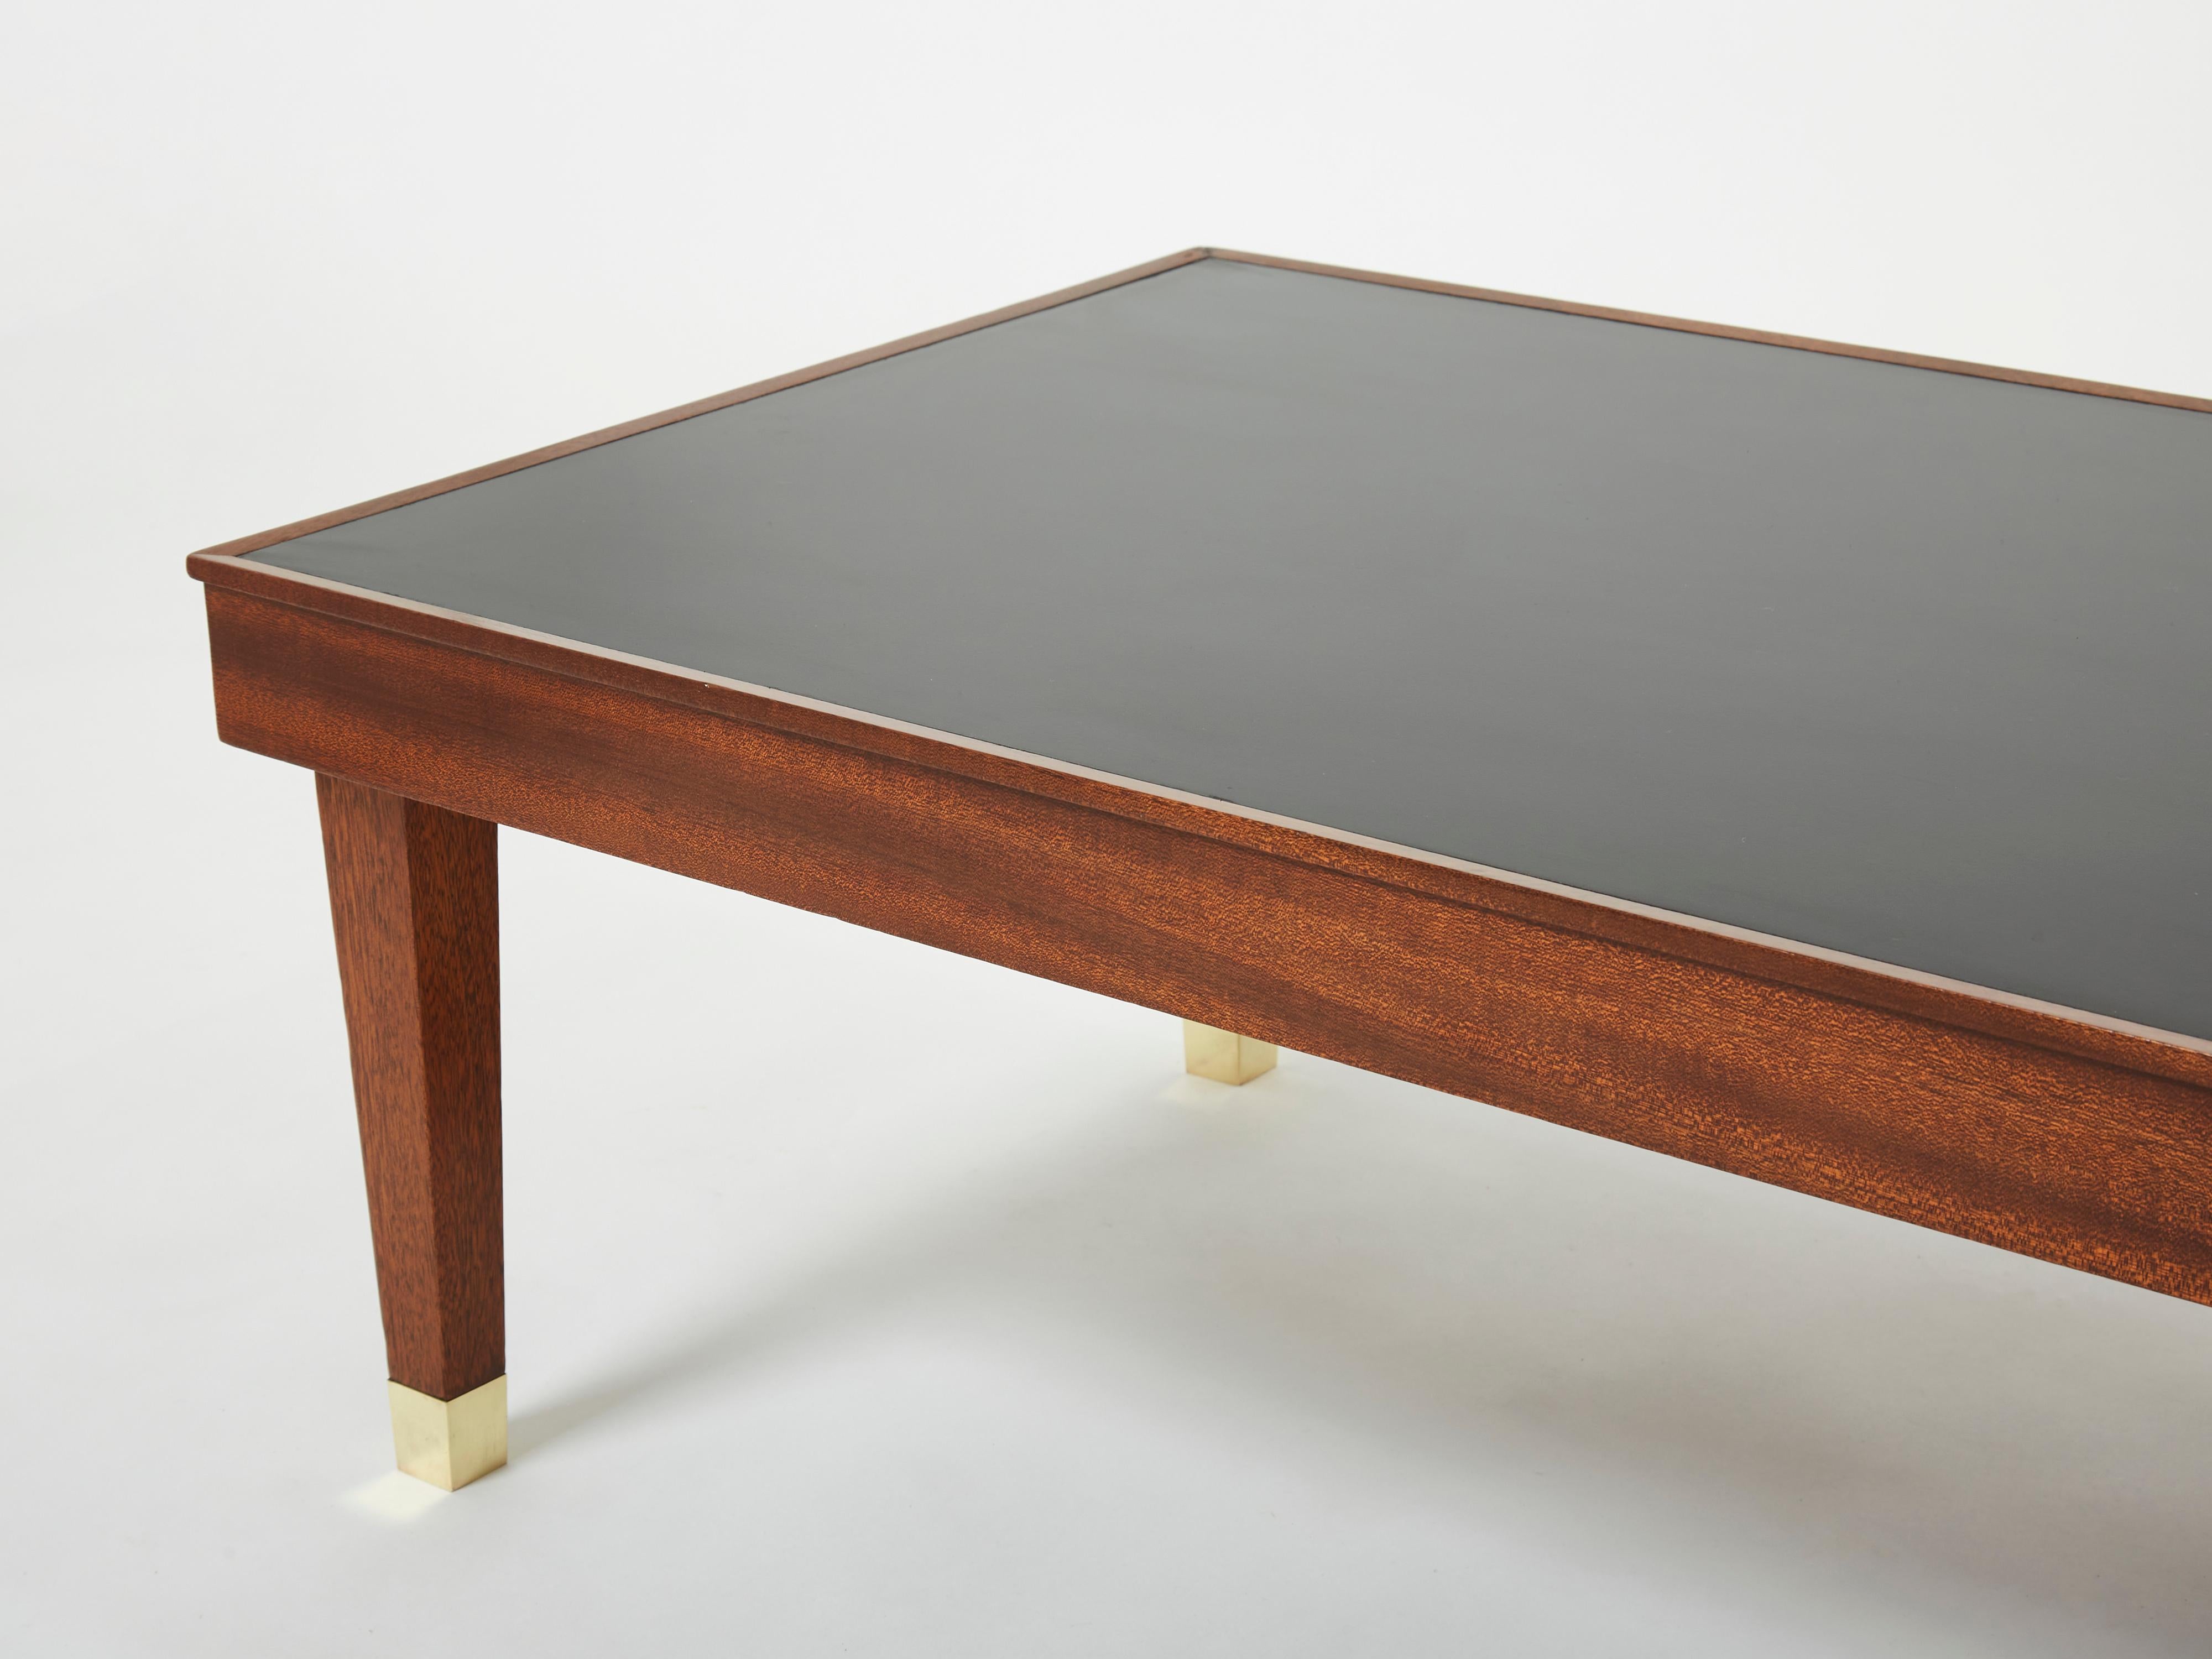 Jacques Adnet Mahogany Brass Modernist Coffee Table, 1950s For Sale 2